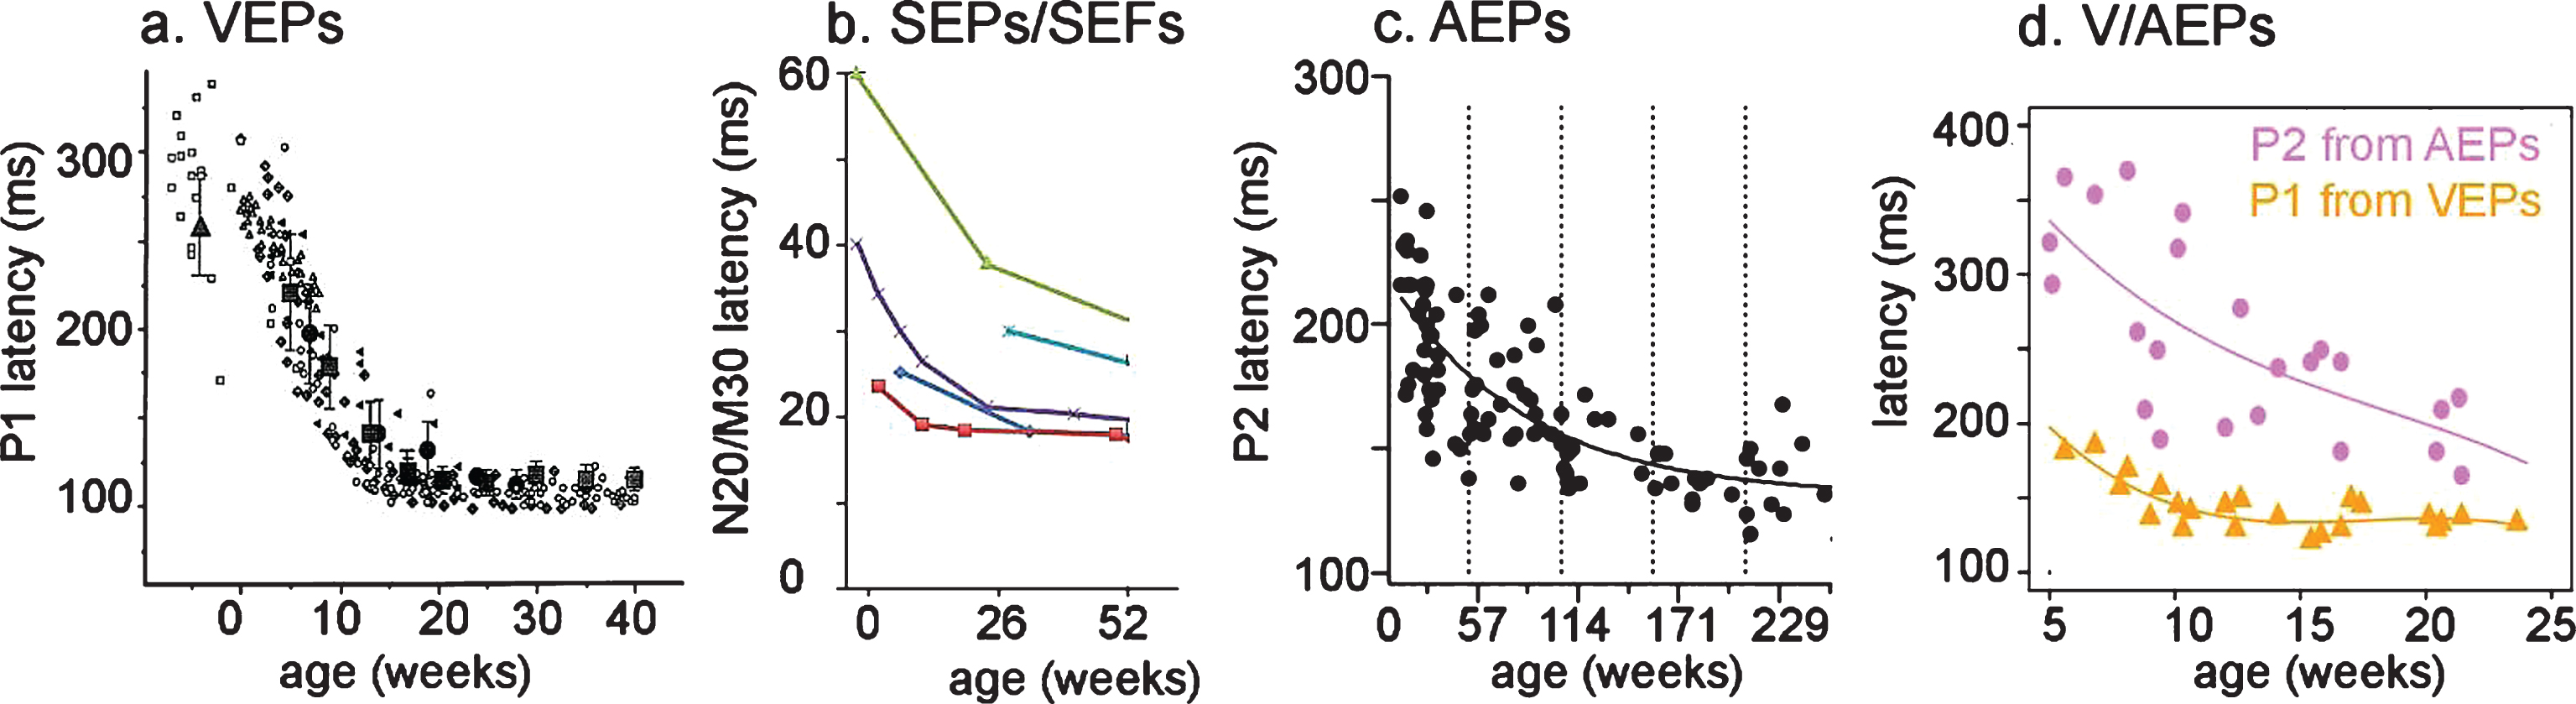 Age-related changes in the latency of early evoked potentials. a: Latency of VEPs P1 during the first post-natal year, adapted from [122]. b: Latency of SEPs N20 and SEFs M30 during the first post-natal year, adapted from [139]. c: Latency of AEPs P2 during childhood, adapted from [140]. d: Latency comparison for P1 VEPs and P2 AEPs in infants.